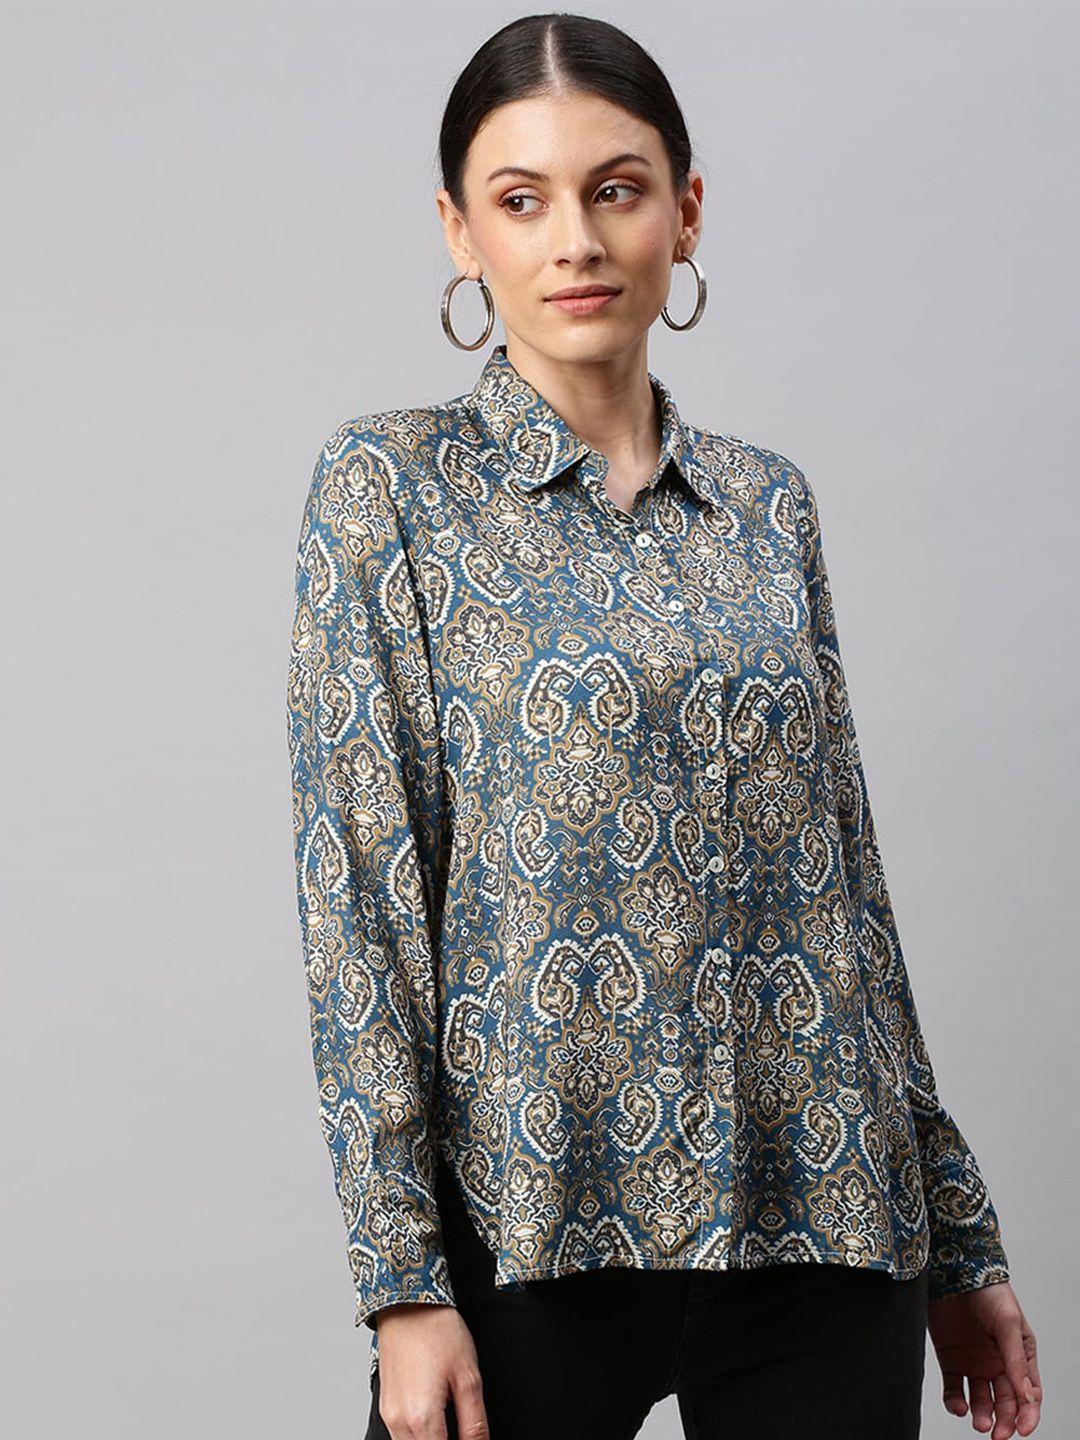 chemistry-ethnic-motifs-printed-cuffed-sleeves-shirt-style-top